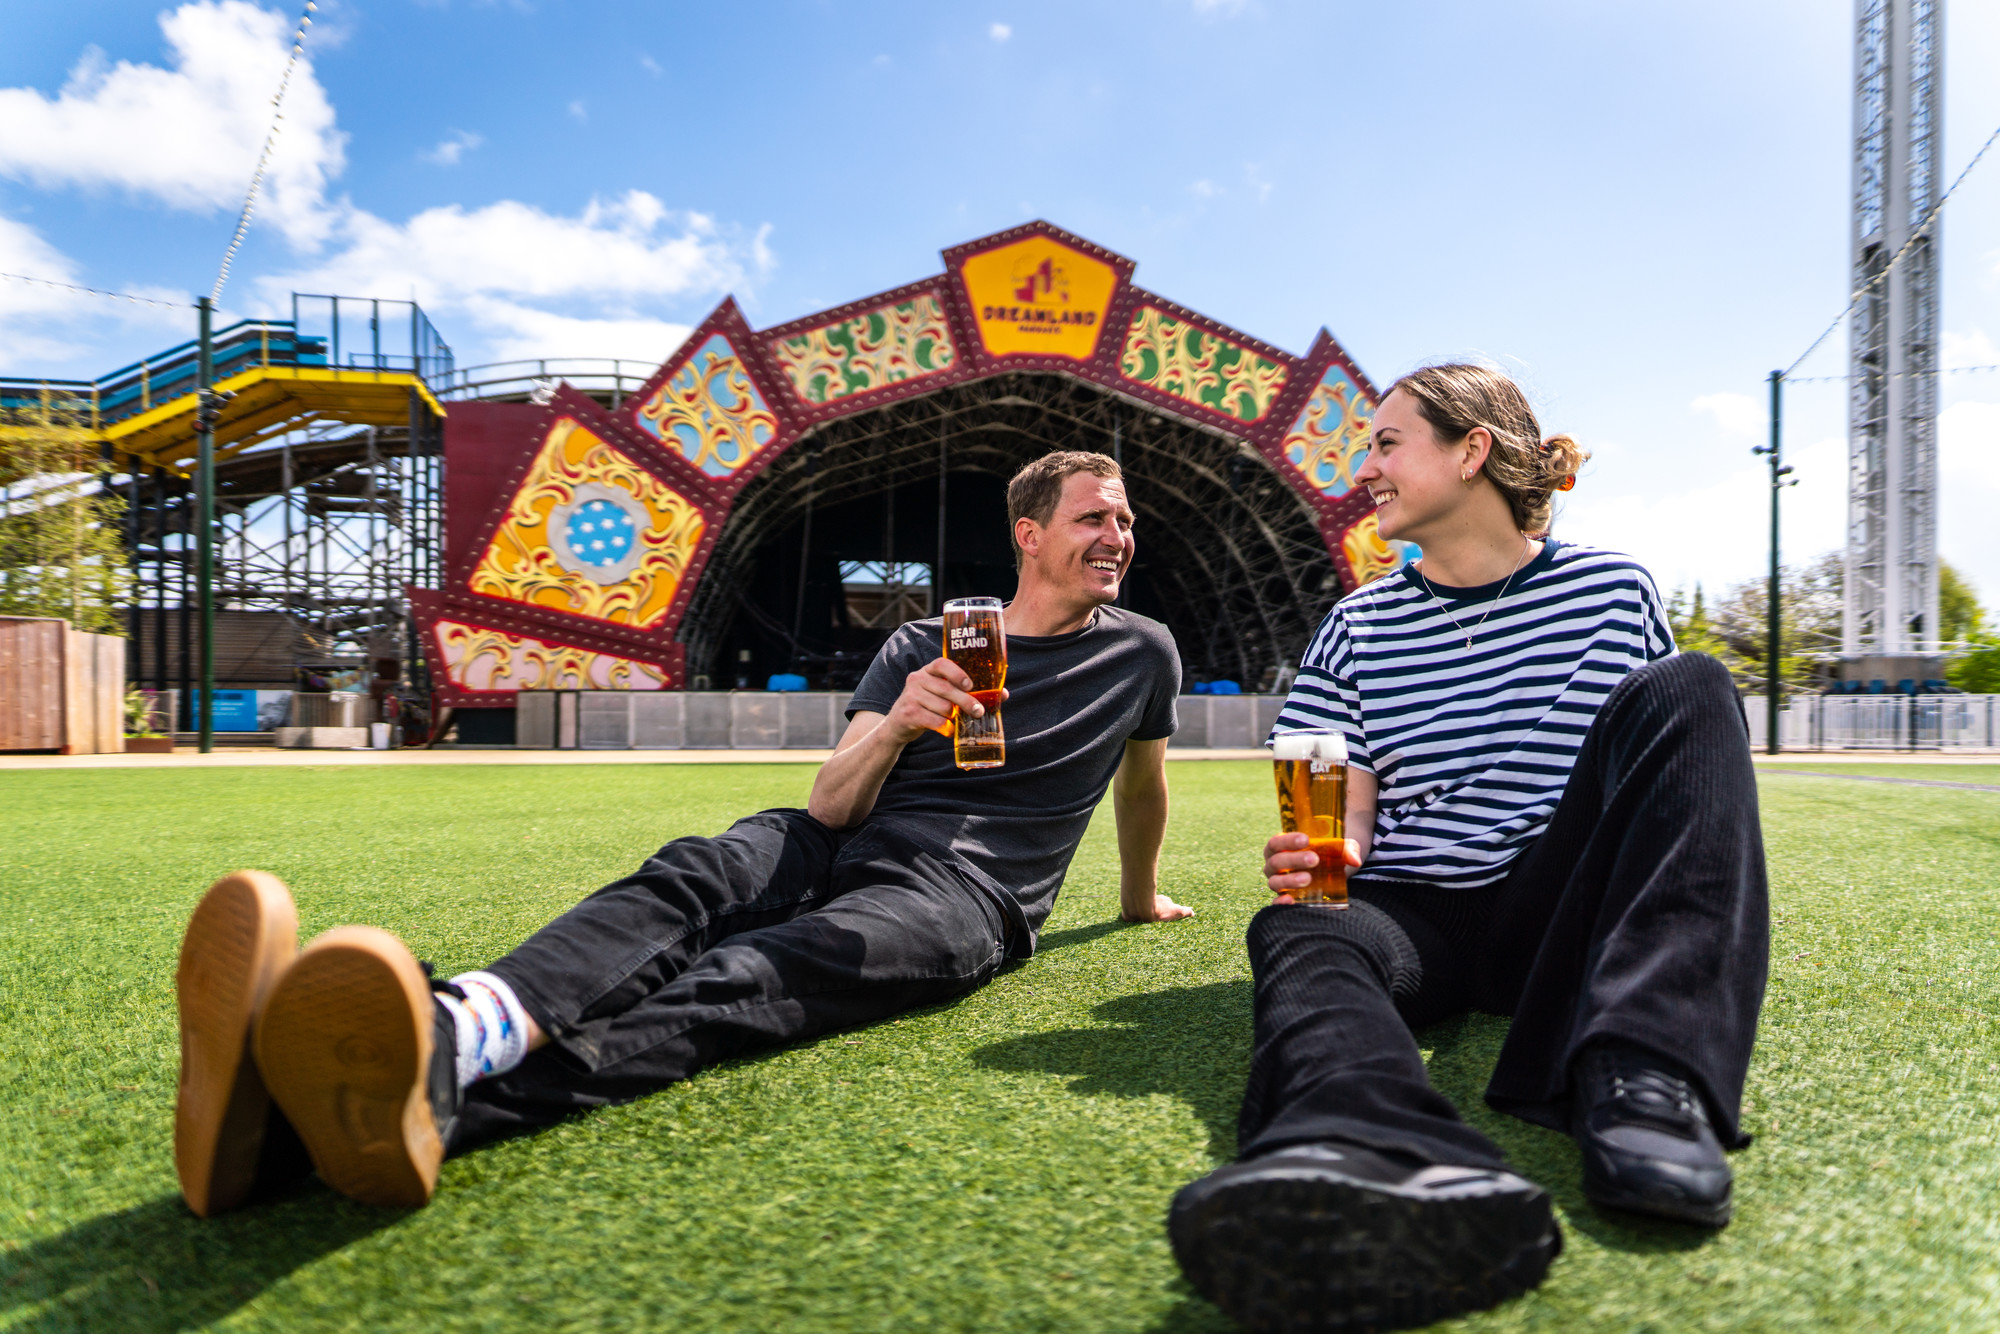 Shepherd Neame is teaming up with Dreamland Margate